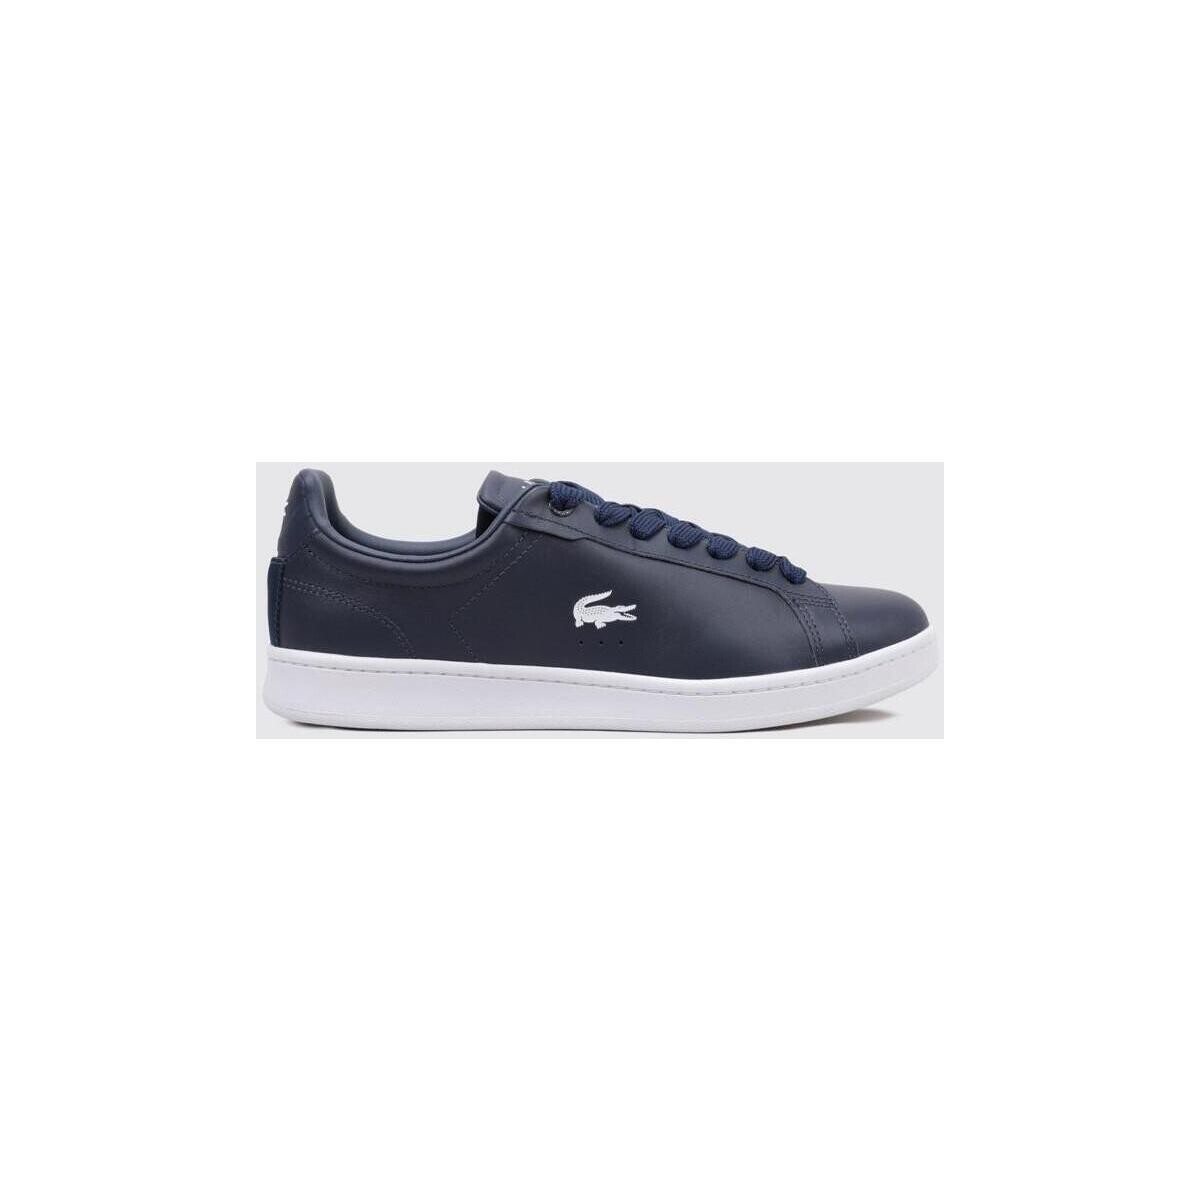 Chaussures Homme Baskets basses Lacoste CARNABY PRO 124 2 SMA Marine